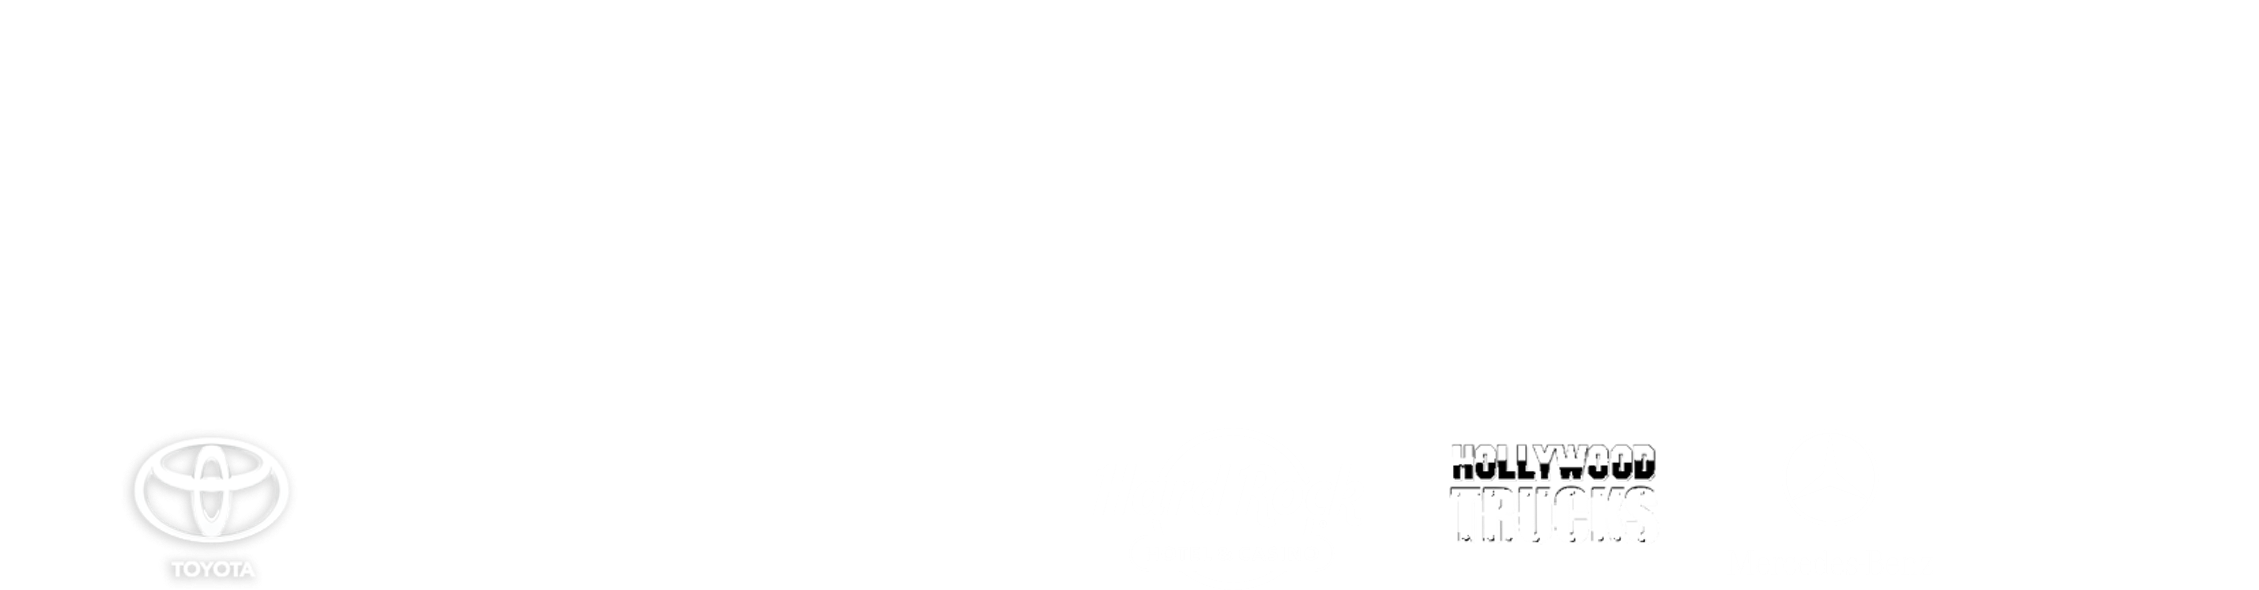 frontpage head banner logos